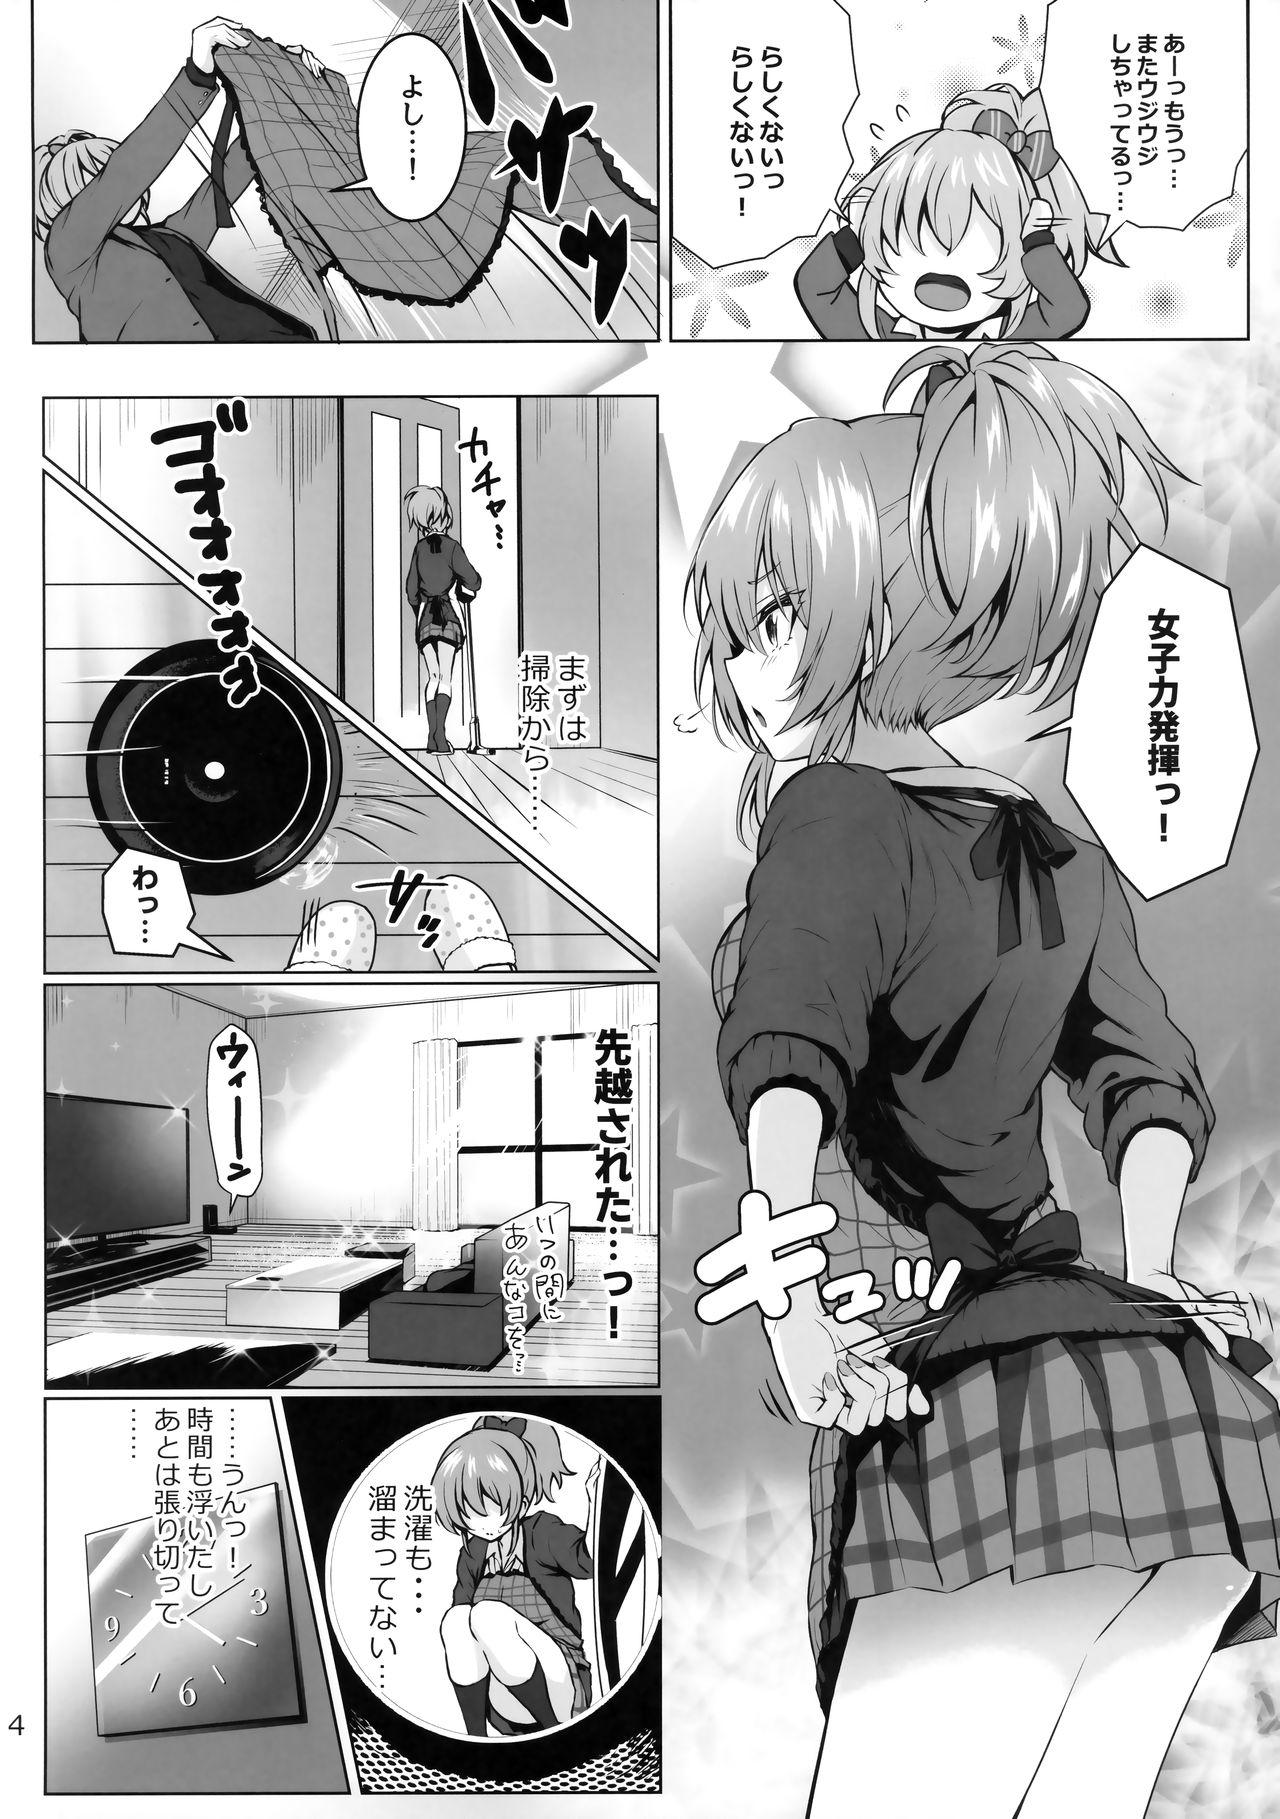 Actress Mika and P++ - The idolmaster Cheating Wife - Page 3